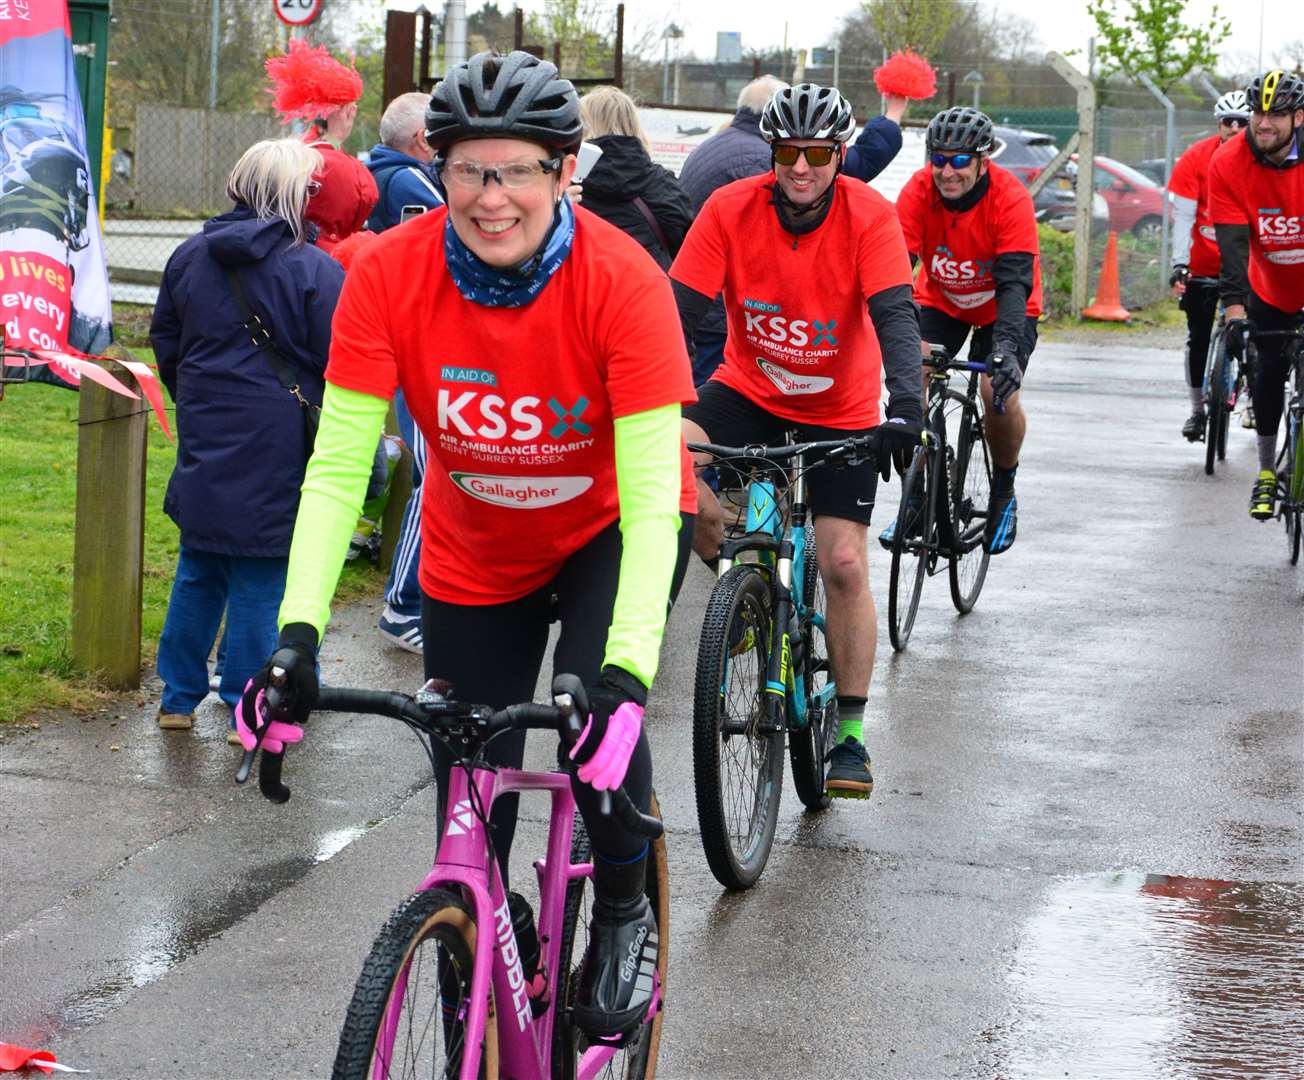 Tracey Crouch, MP for Chatham and Aylesford, took part in the fundraising event. Picture: KSS